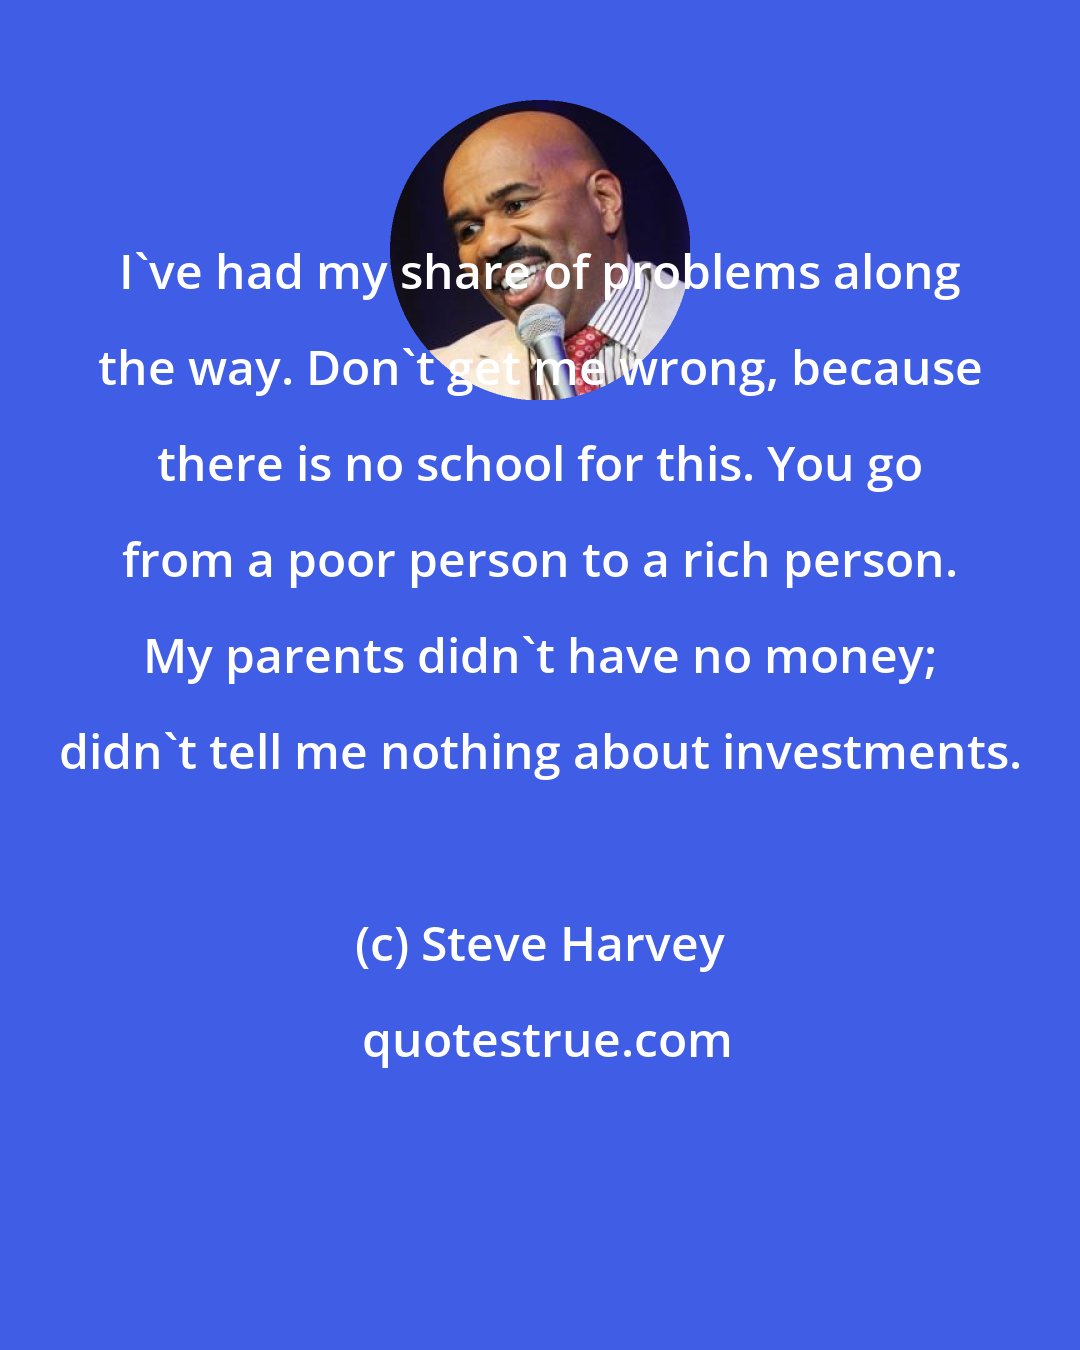 Steve Harvey: I've had my share of problems along the way. Don't get me wrong, because there is no school for this. You go from a poor person to a rich person. My parents didn't have no money; didn't tell me nothing about investments.